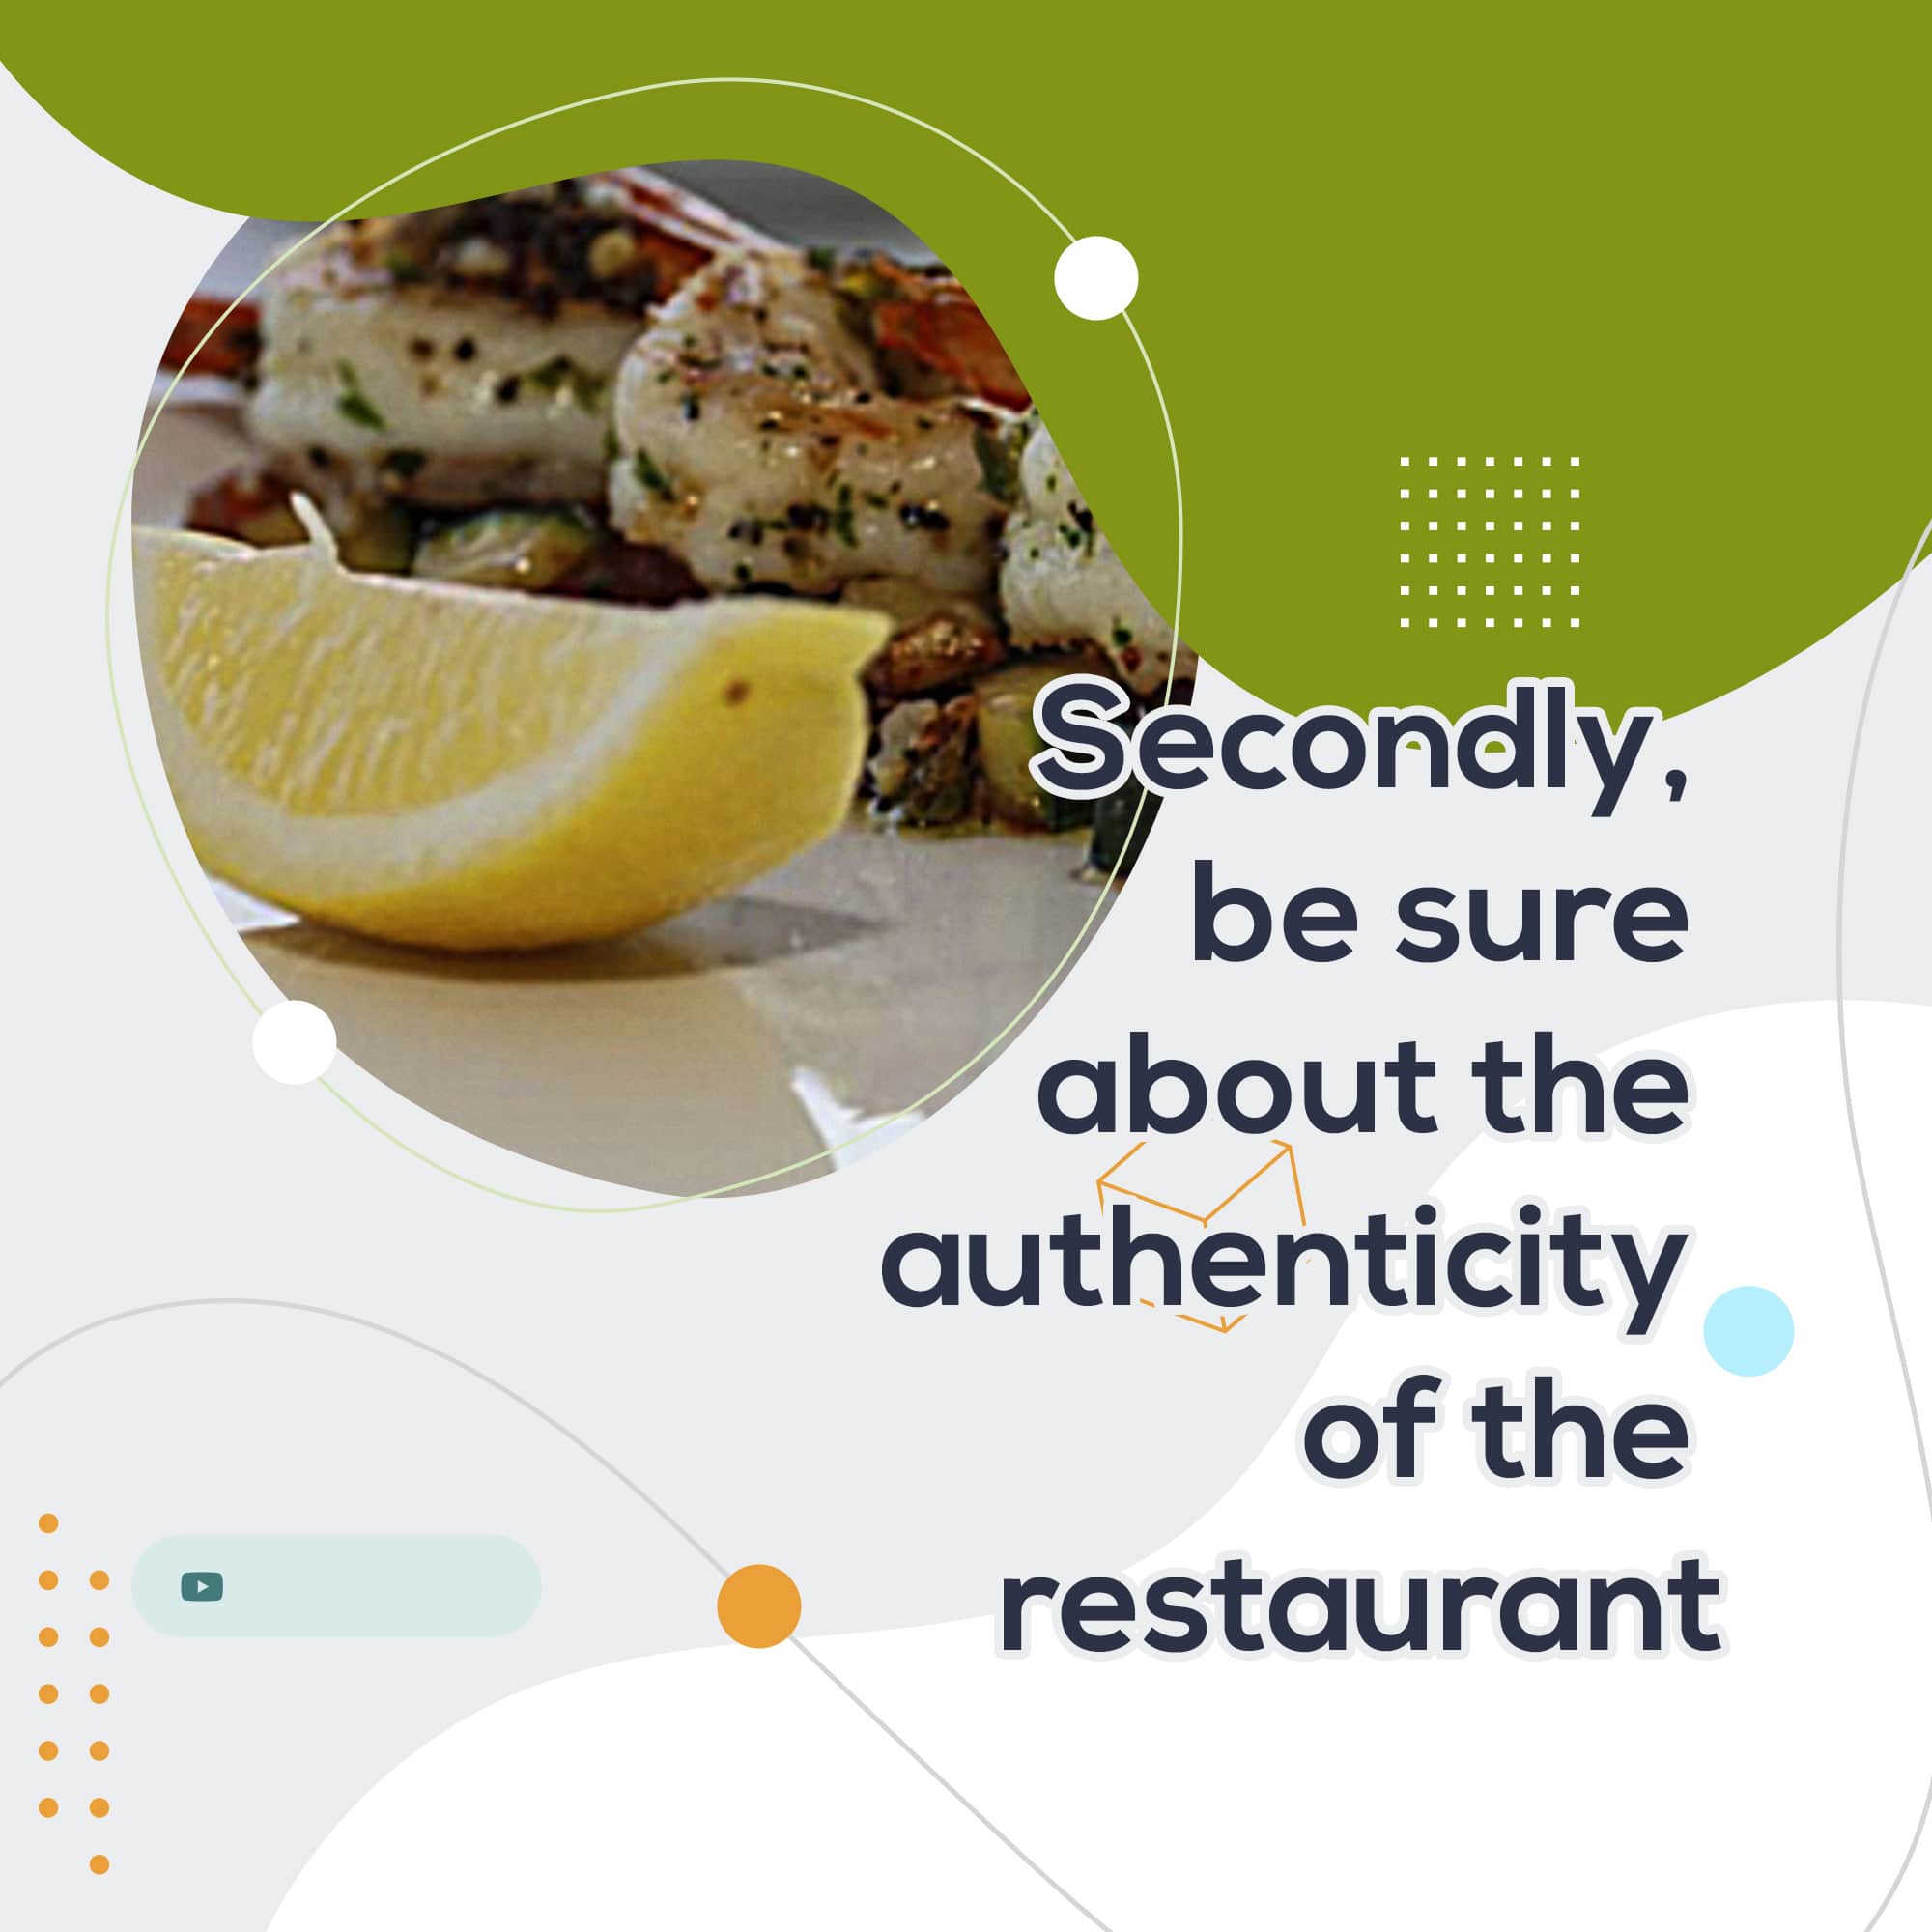 Secondly, be sure about the authenticity of the restaurant